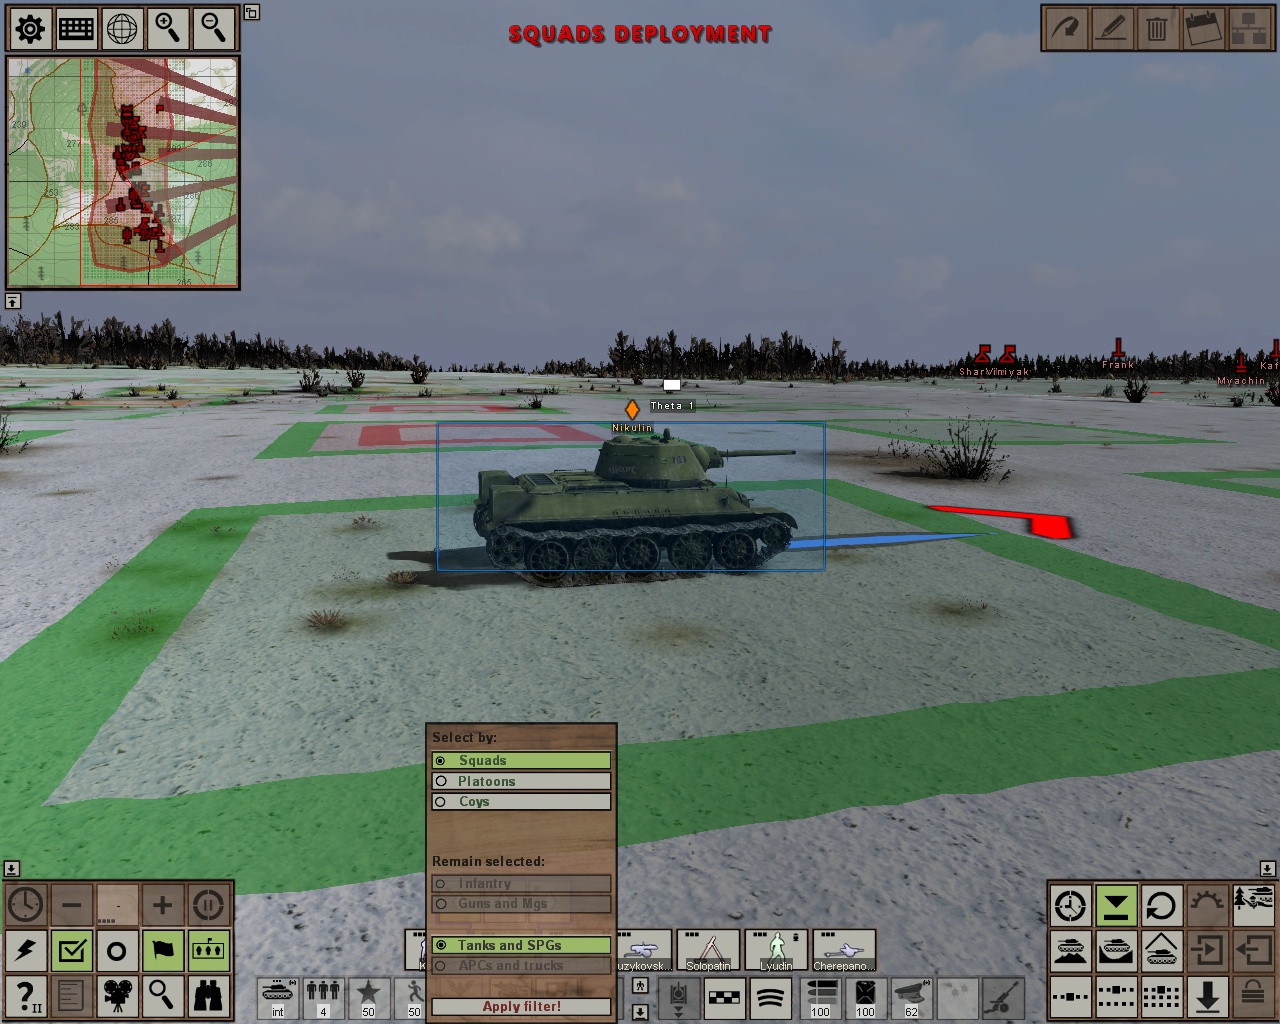 achtung panzer operation star system requirements